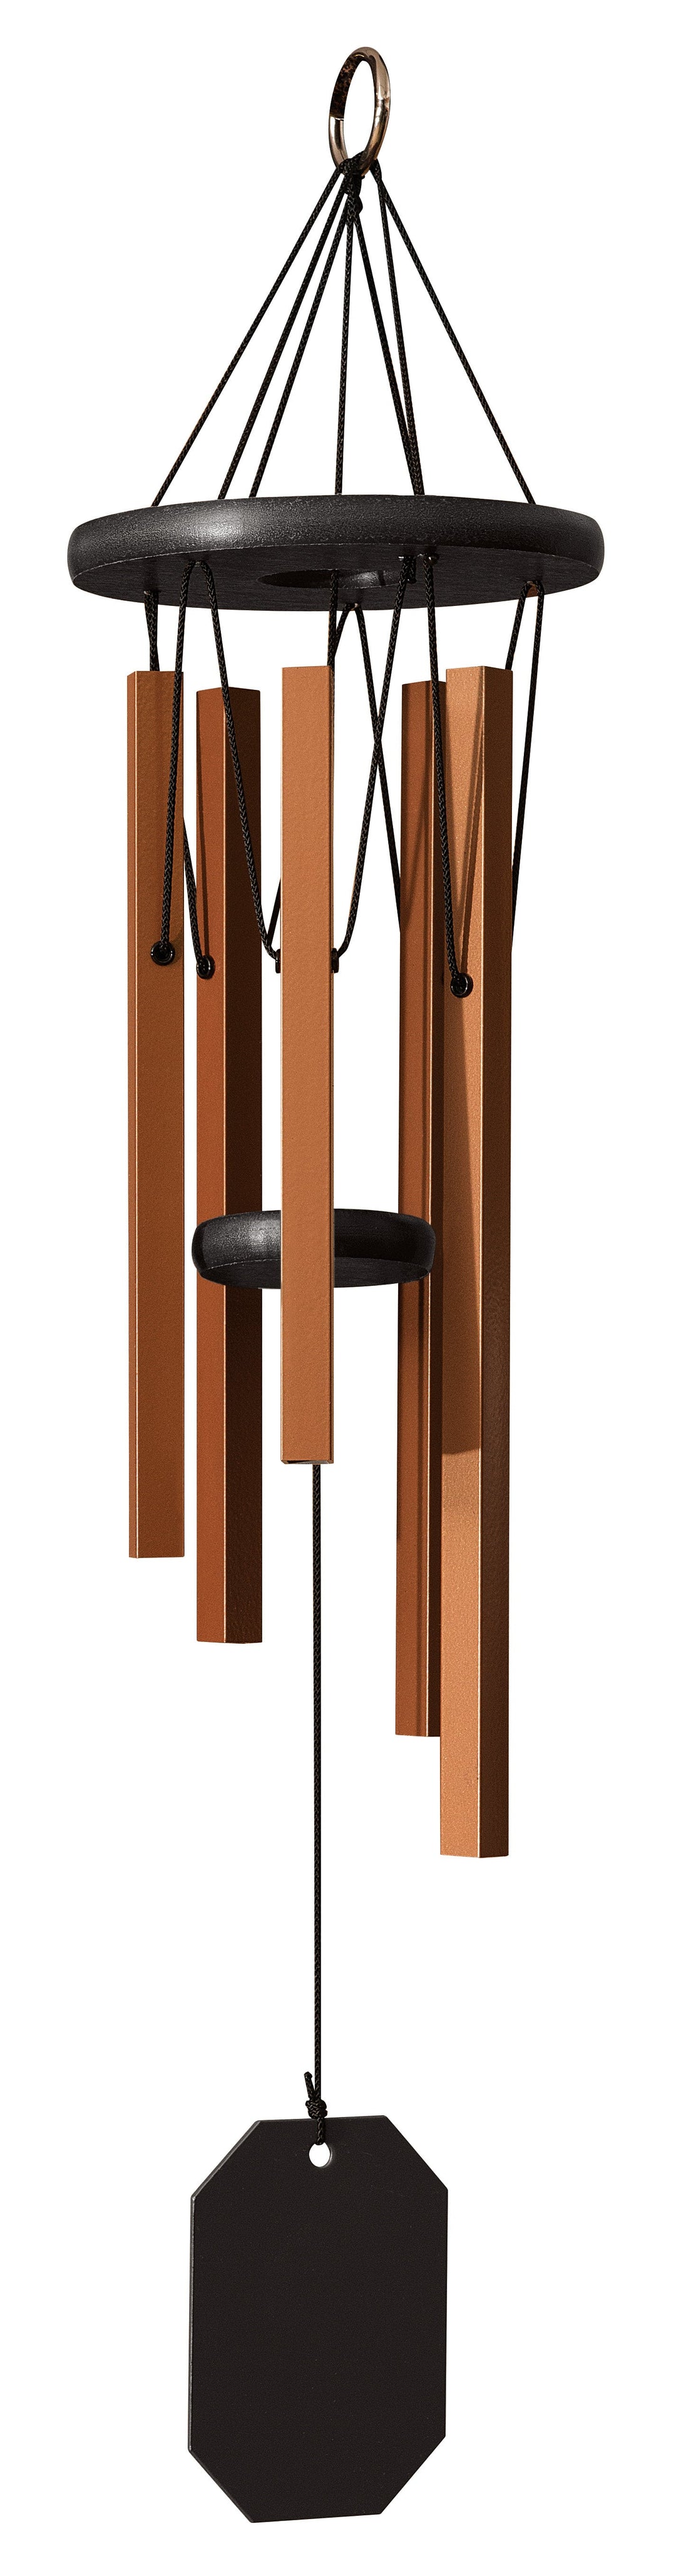 Morning Song Wind Chime 25in Hill Country Amish